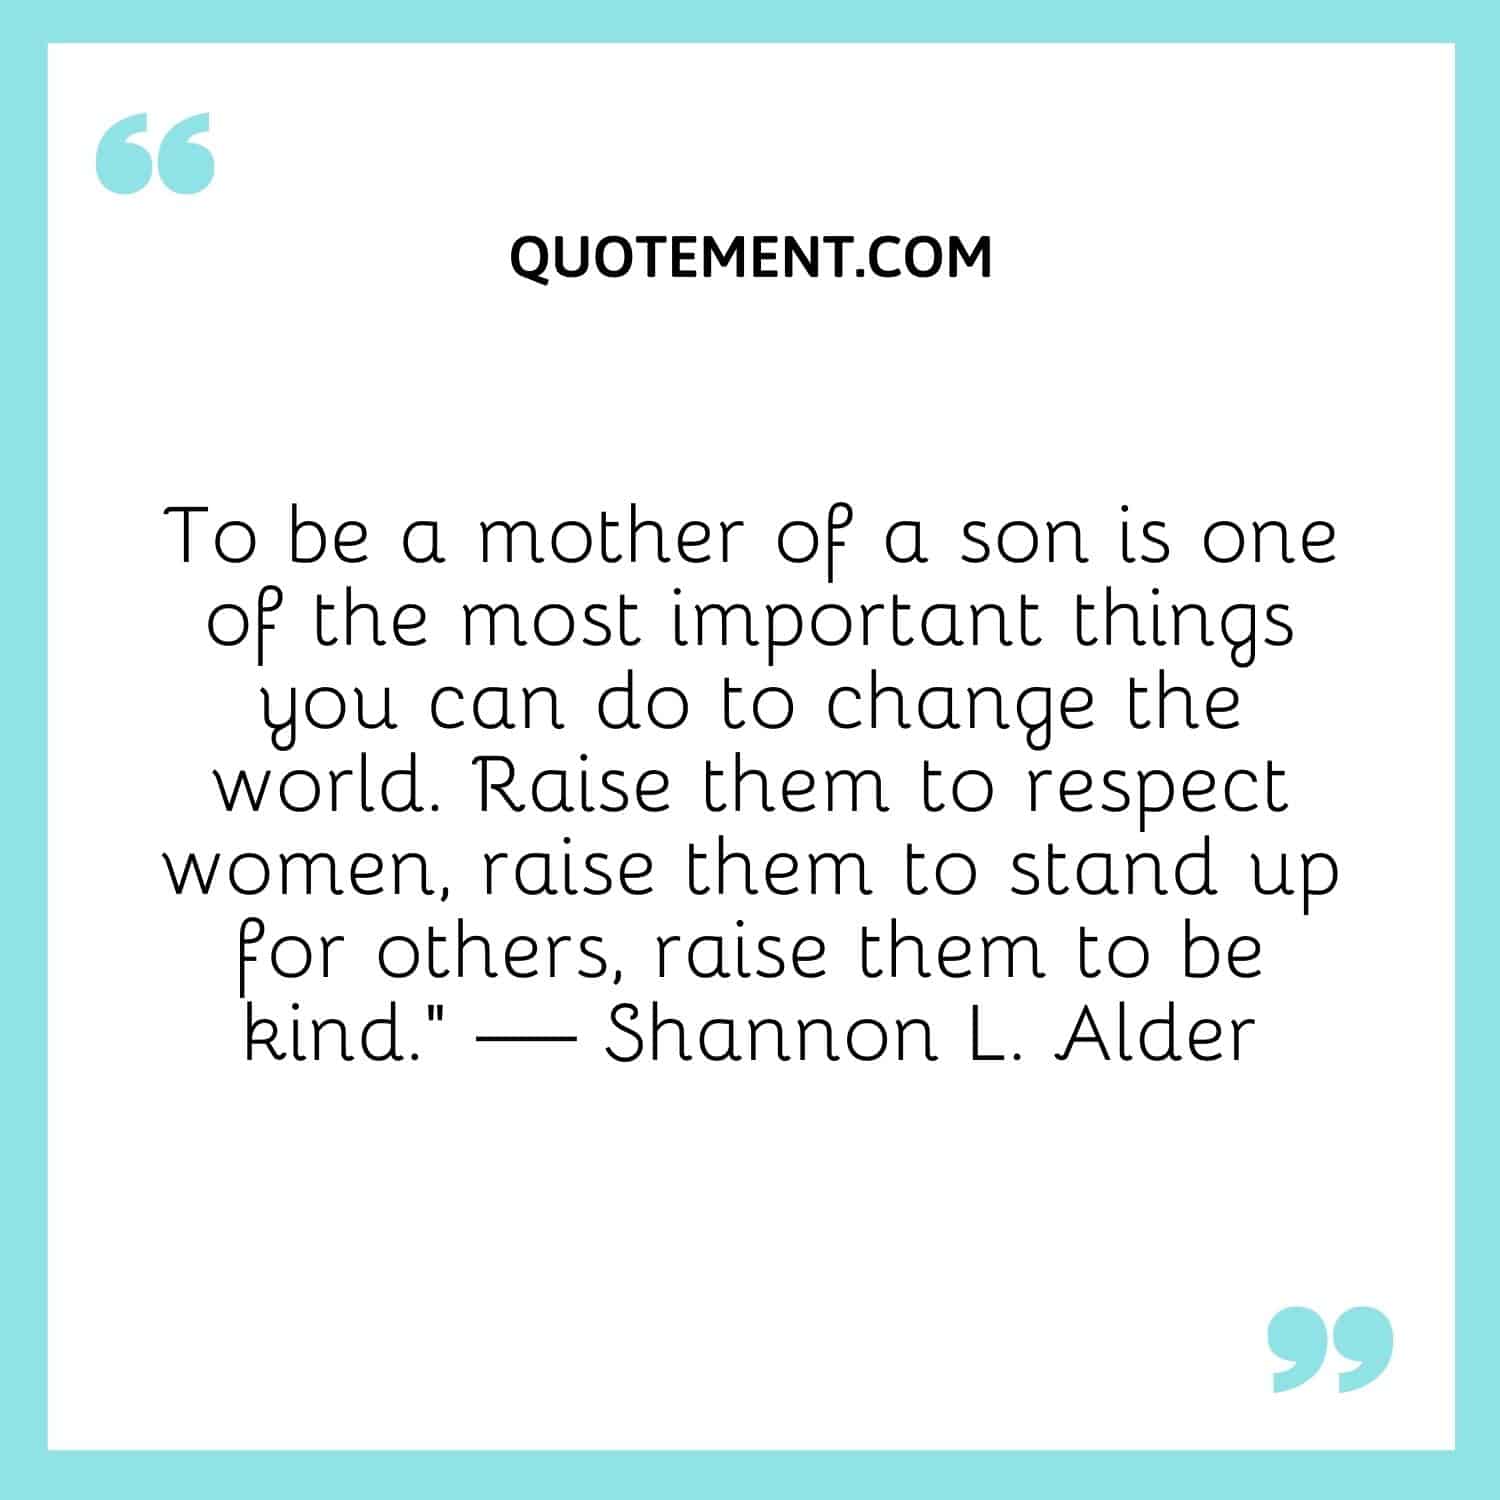 To be a mother of a son is one of the most important things you can do to change the world